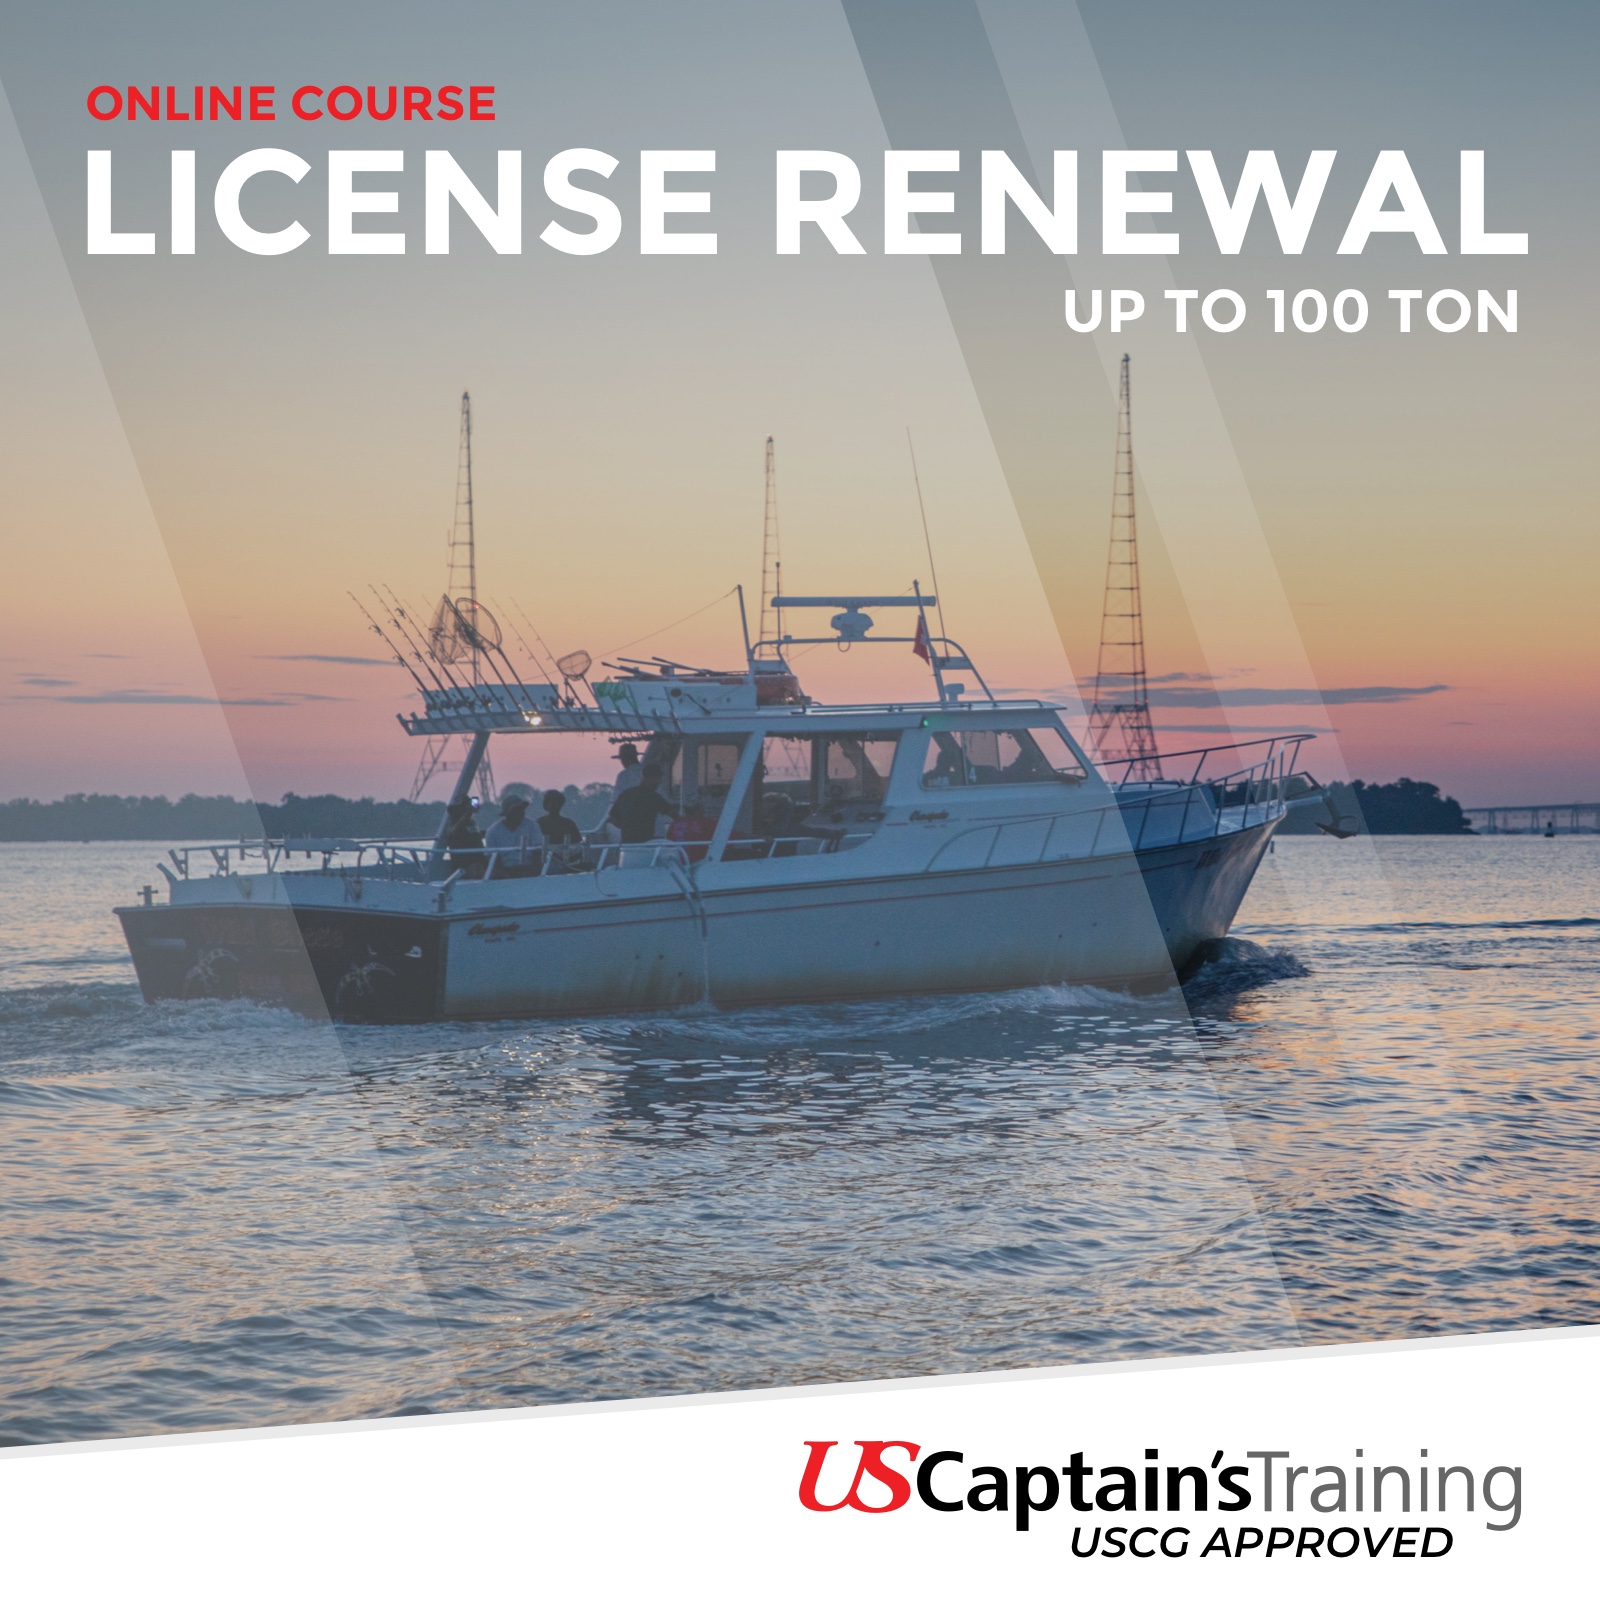 Captain's License Online Course & Exam from US Captain's Training - License Renewal up to 100 Ton